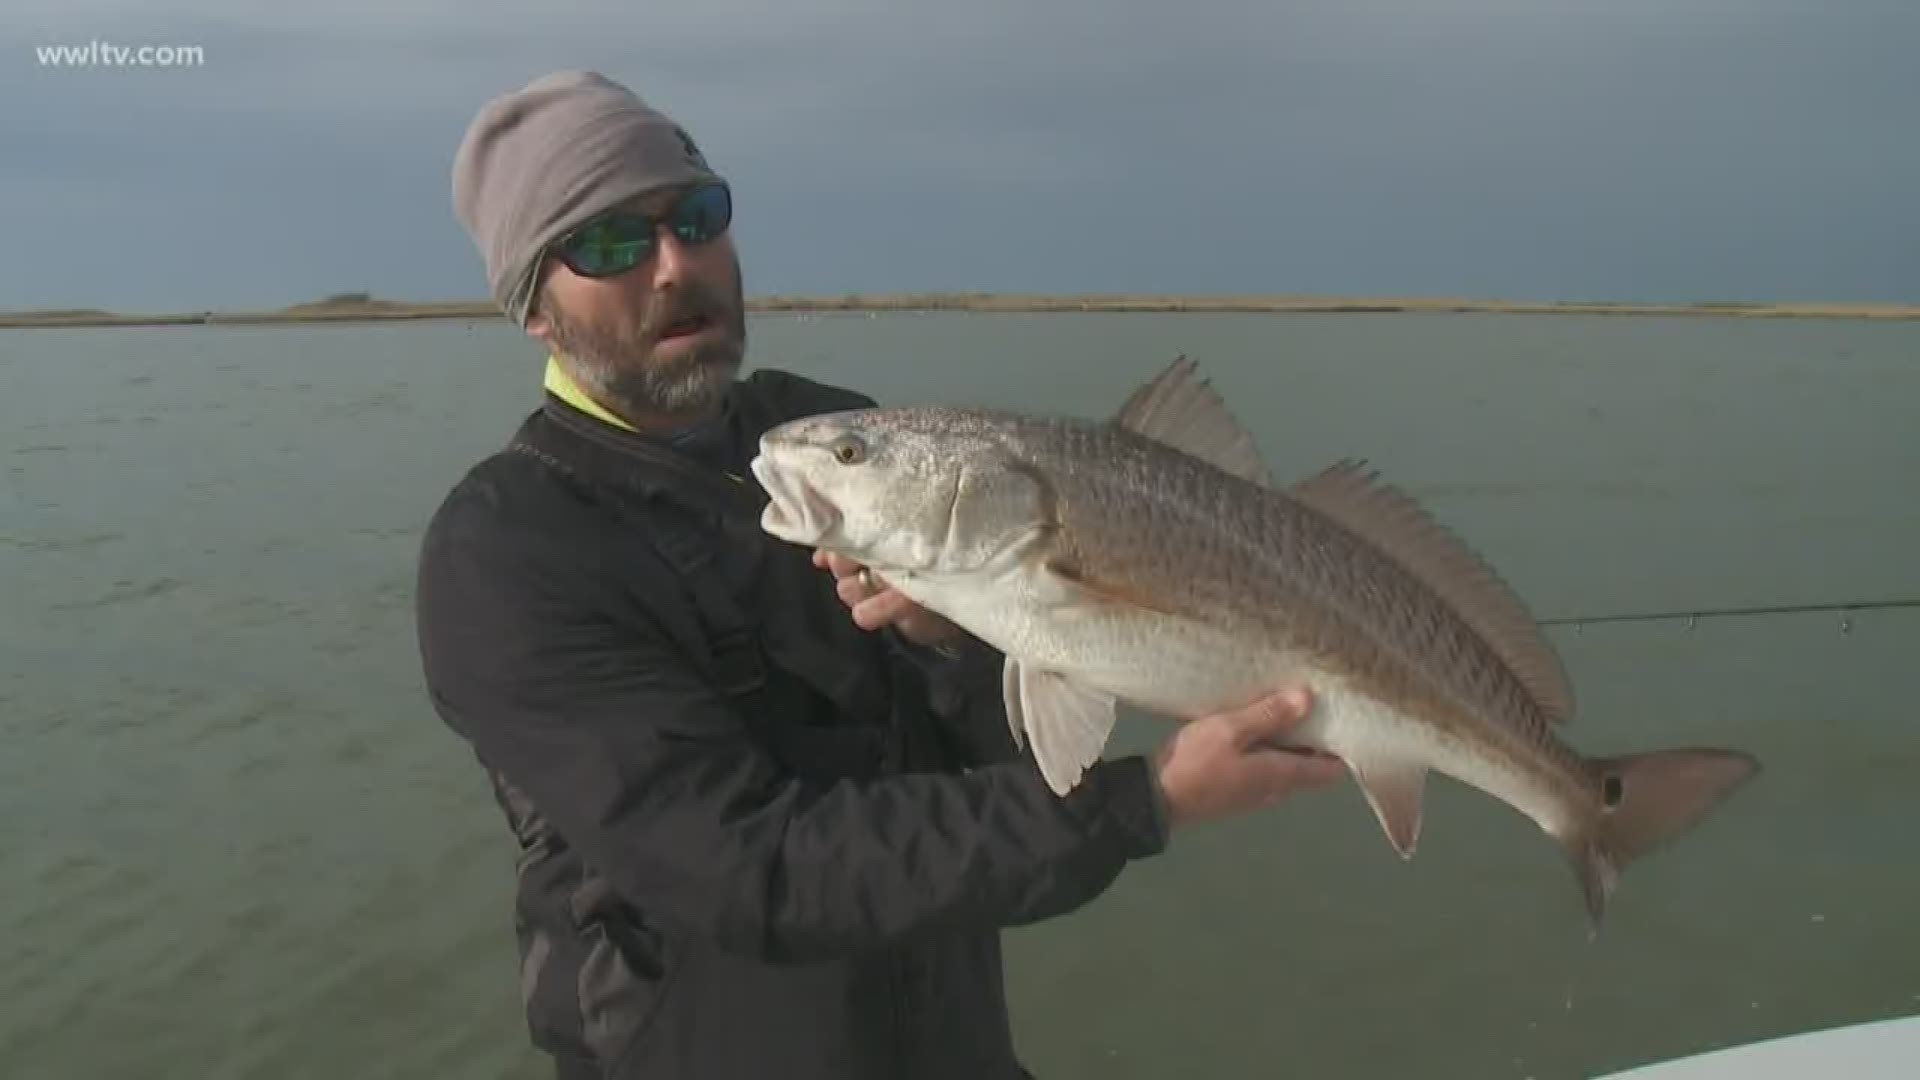 Don Debuc and his crew took us Wintertime fishing for some nice Redfish.